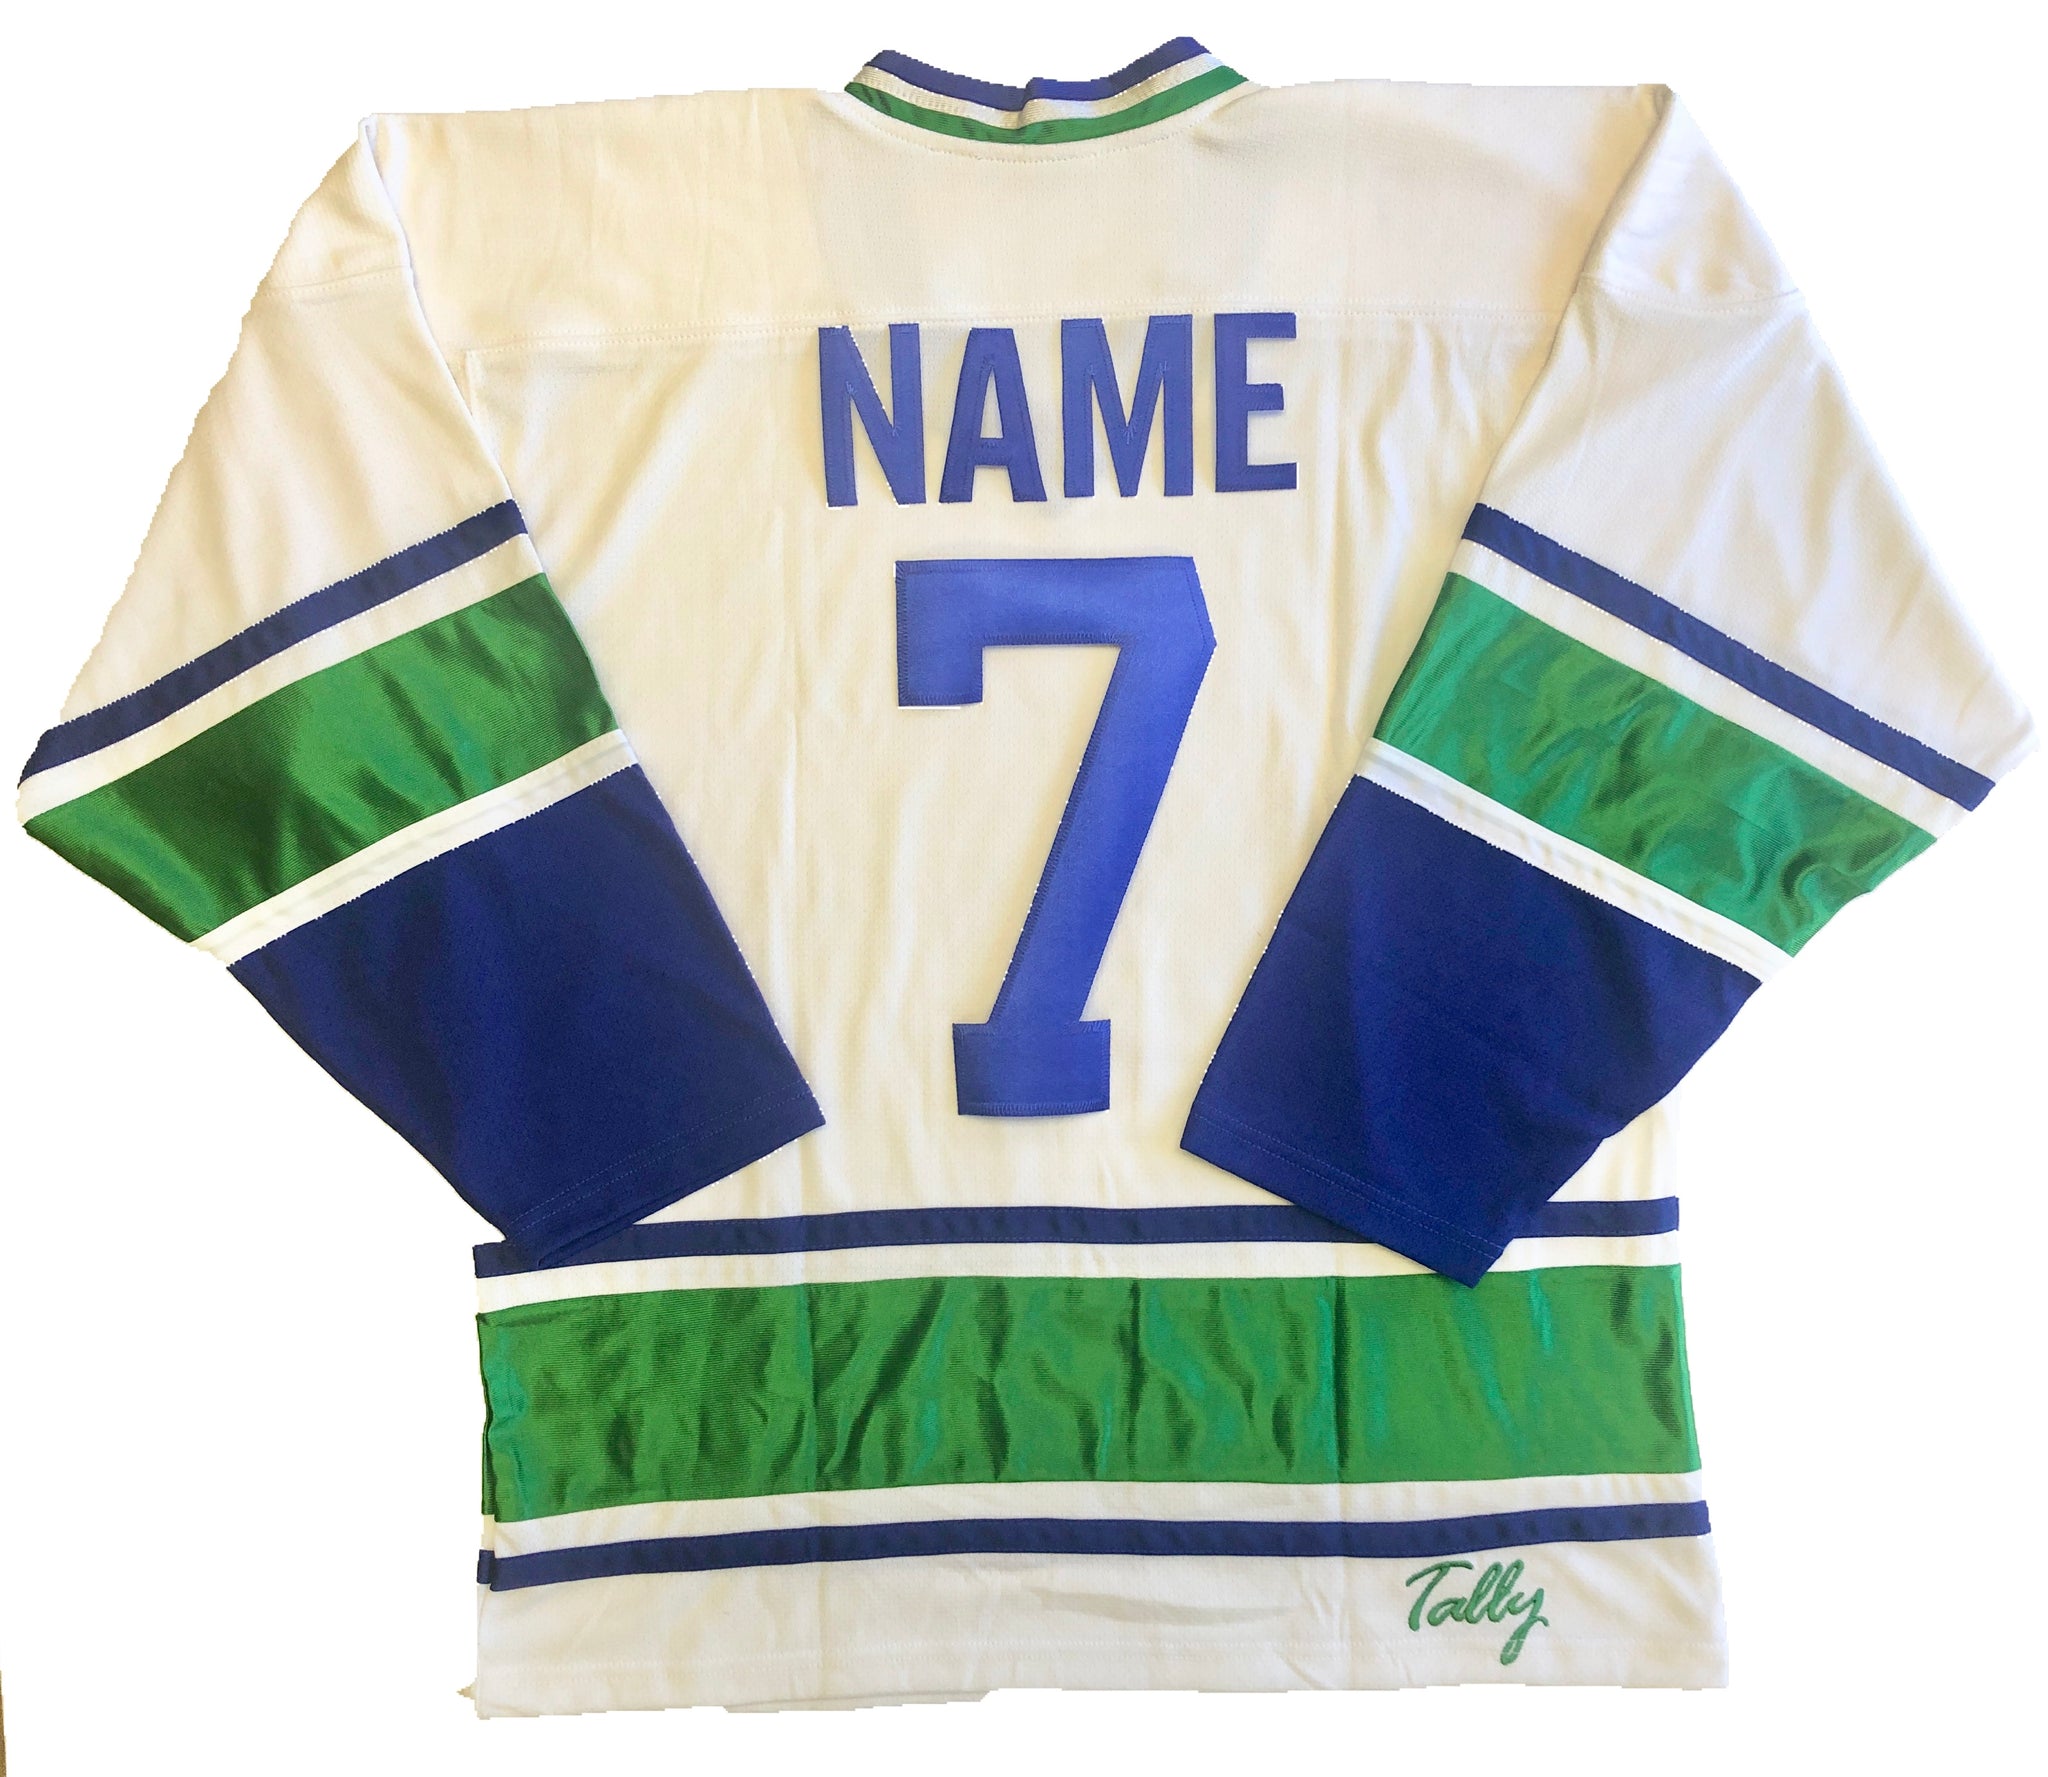 Canucks tell youth lacrosse team to hand over Johnny Canuck jerseys